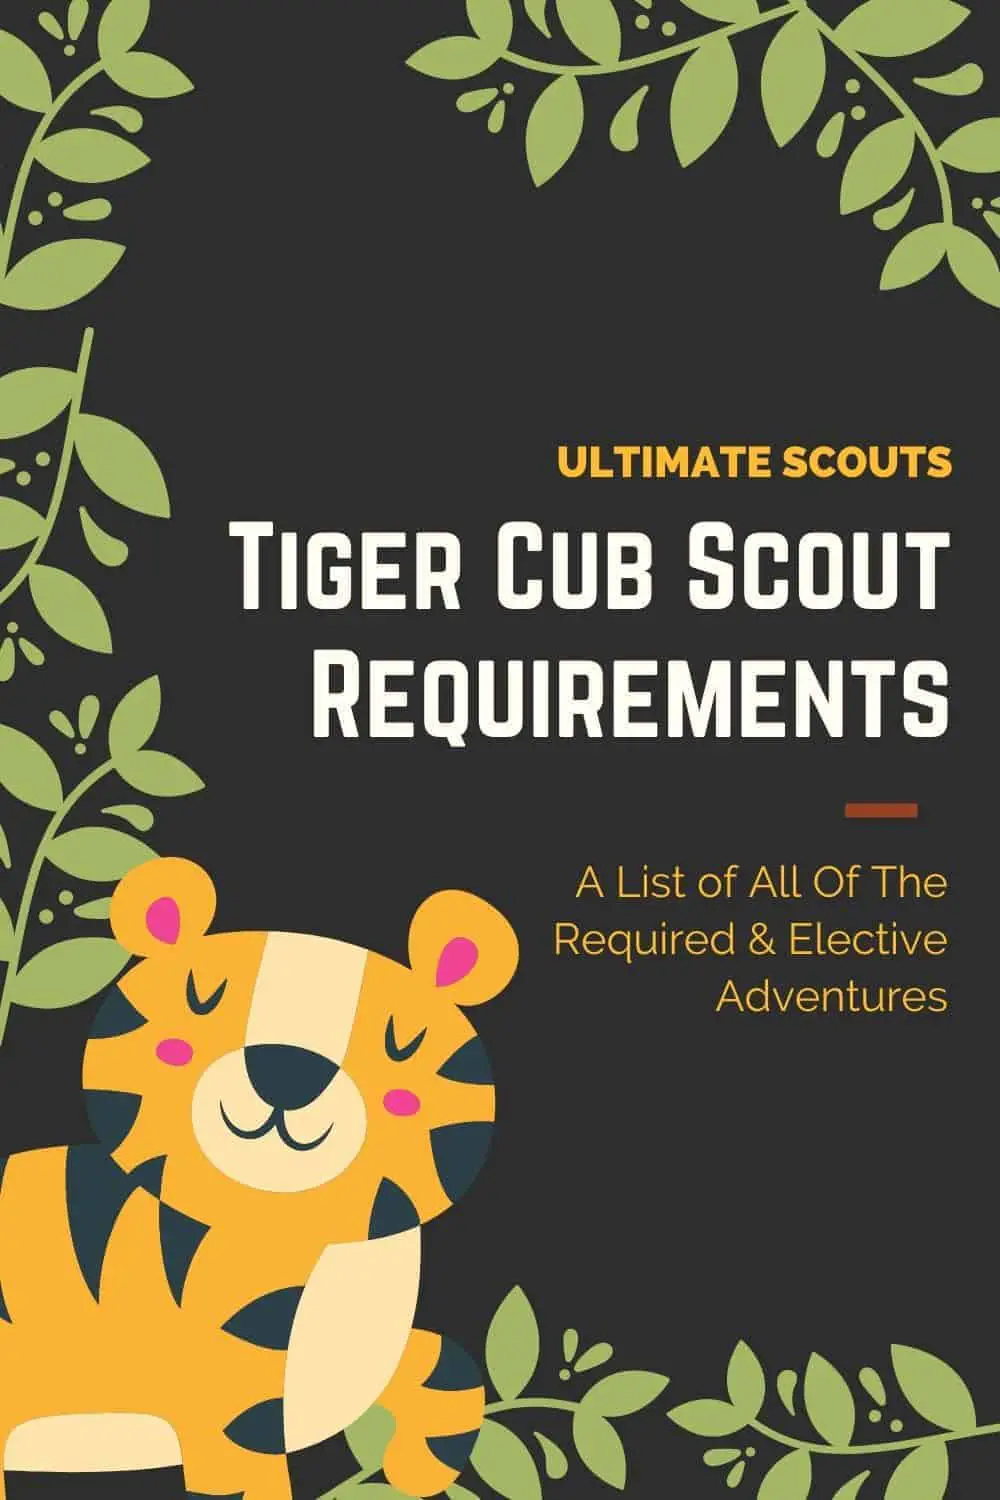 What Are The Cub Scouts Tiger Requirements?